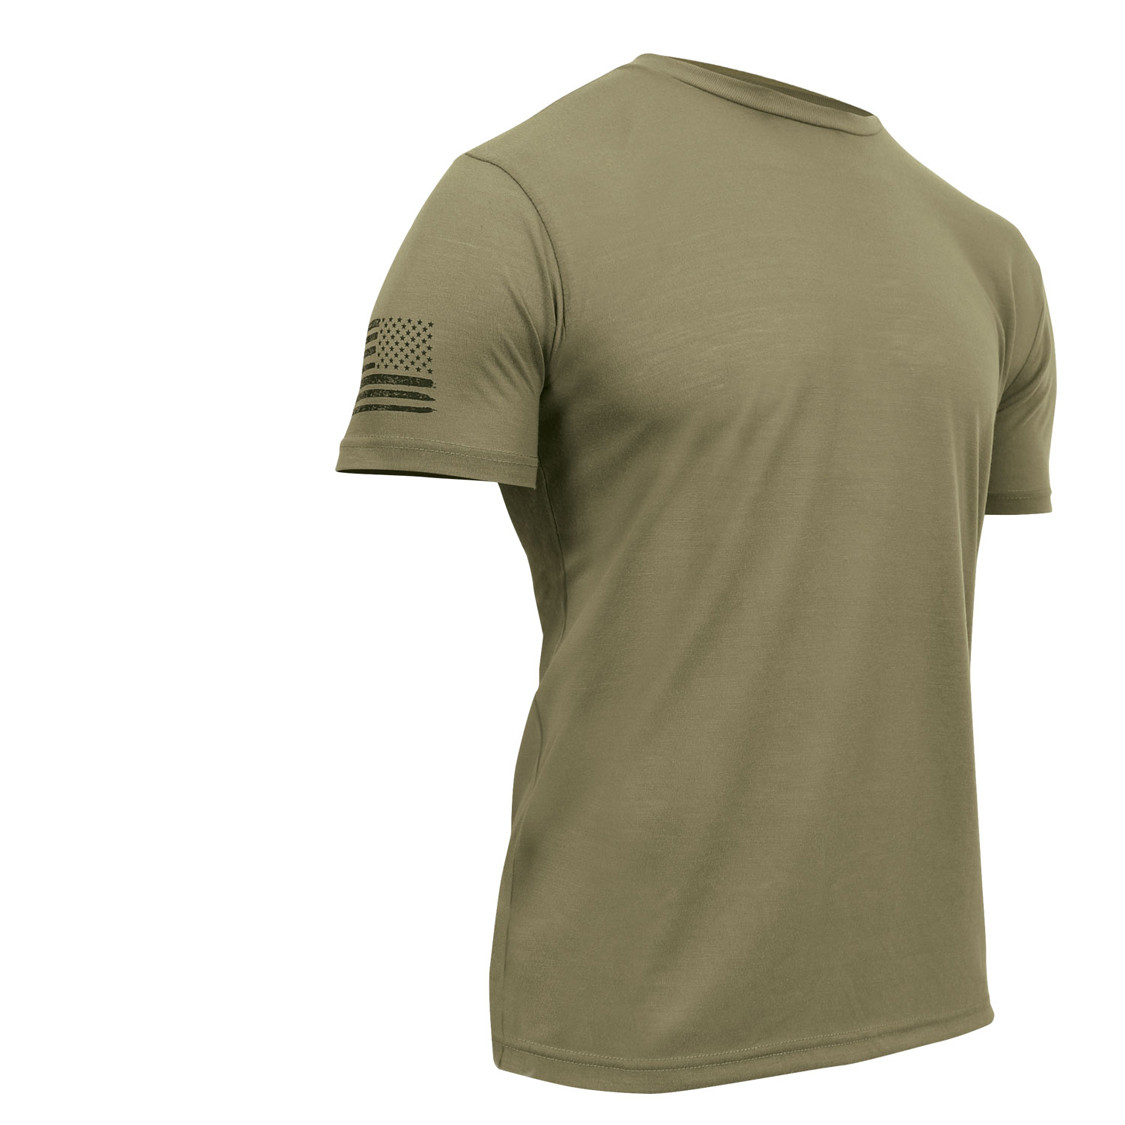 Shop Tactical Athletic Fit T Shirts - Fatigues Army Navy